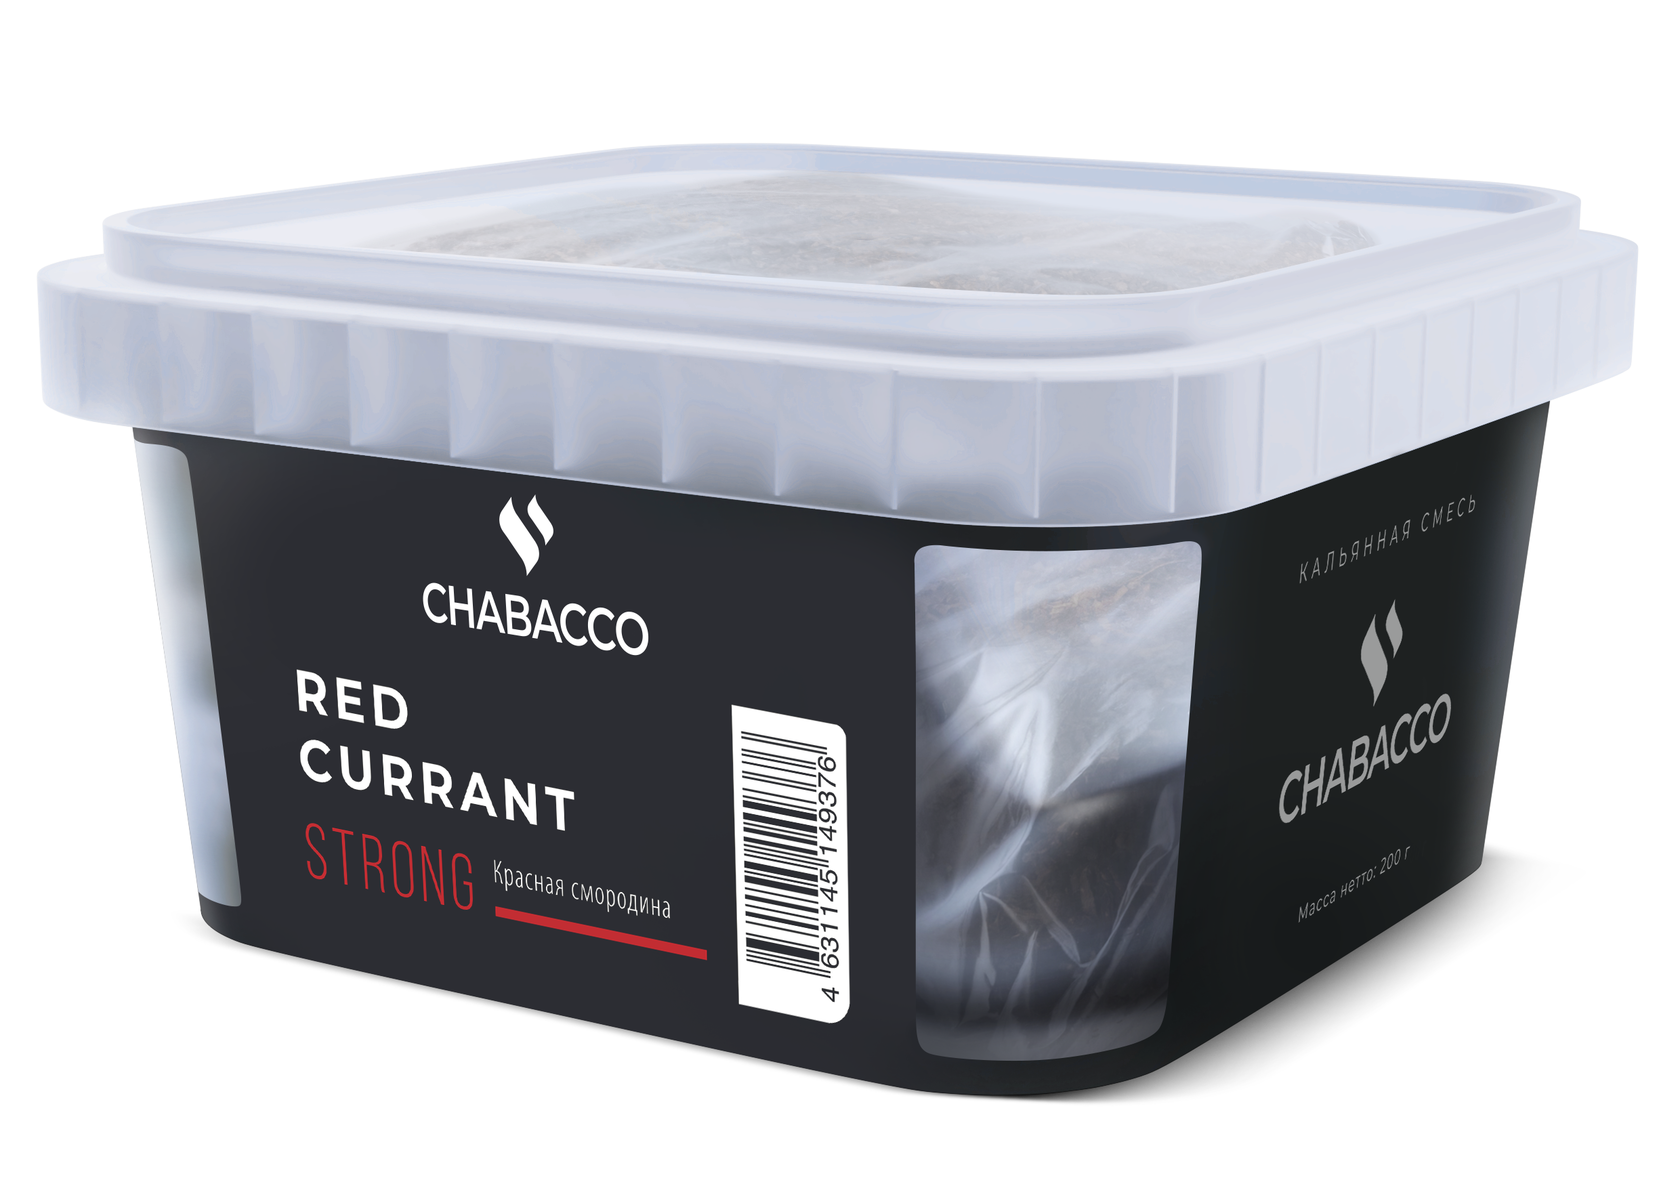 Chabacco - STRONG - RED CURRANT - 200 g